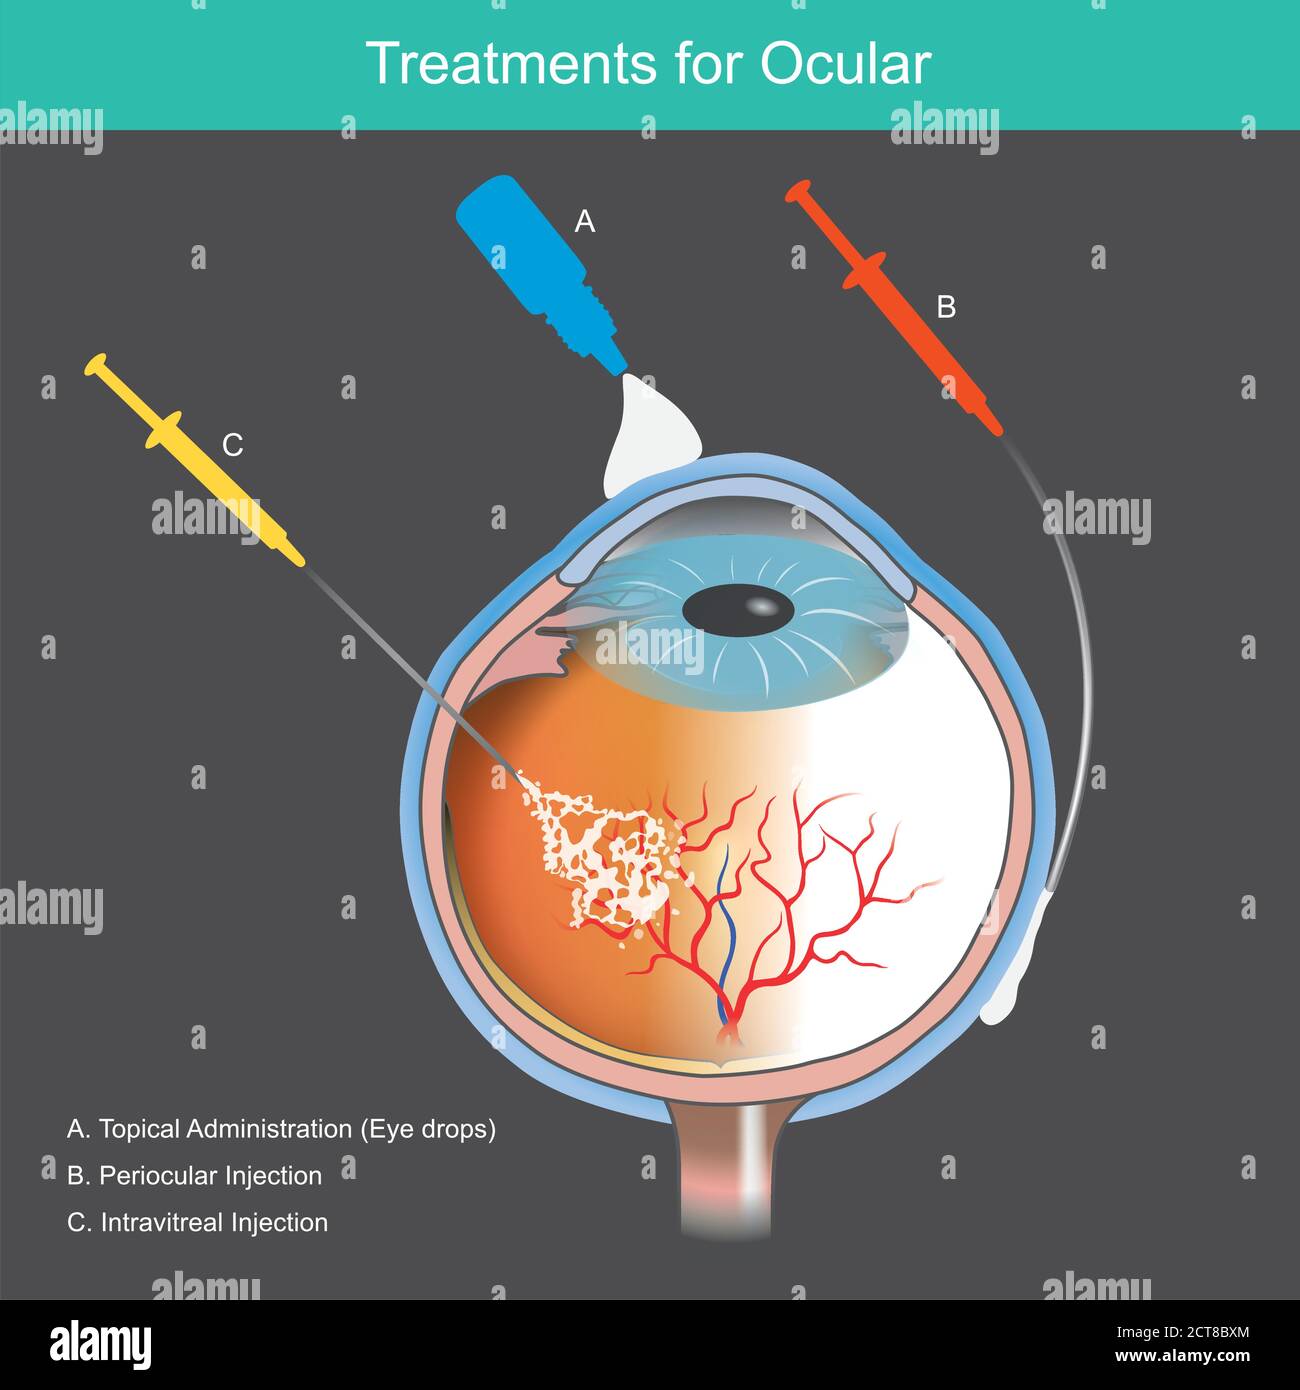 Treatments for Ocular. Illustration explain treatment of retinal diseases caused by blood vessel abnormal of the eye. Stock Vector